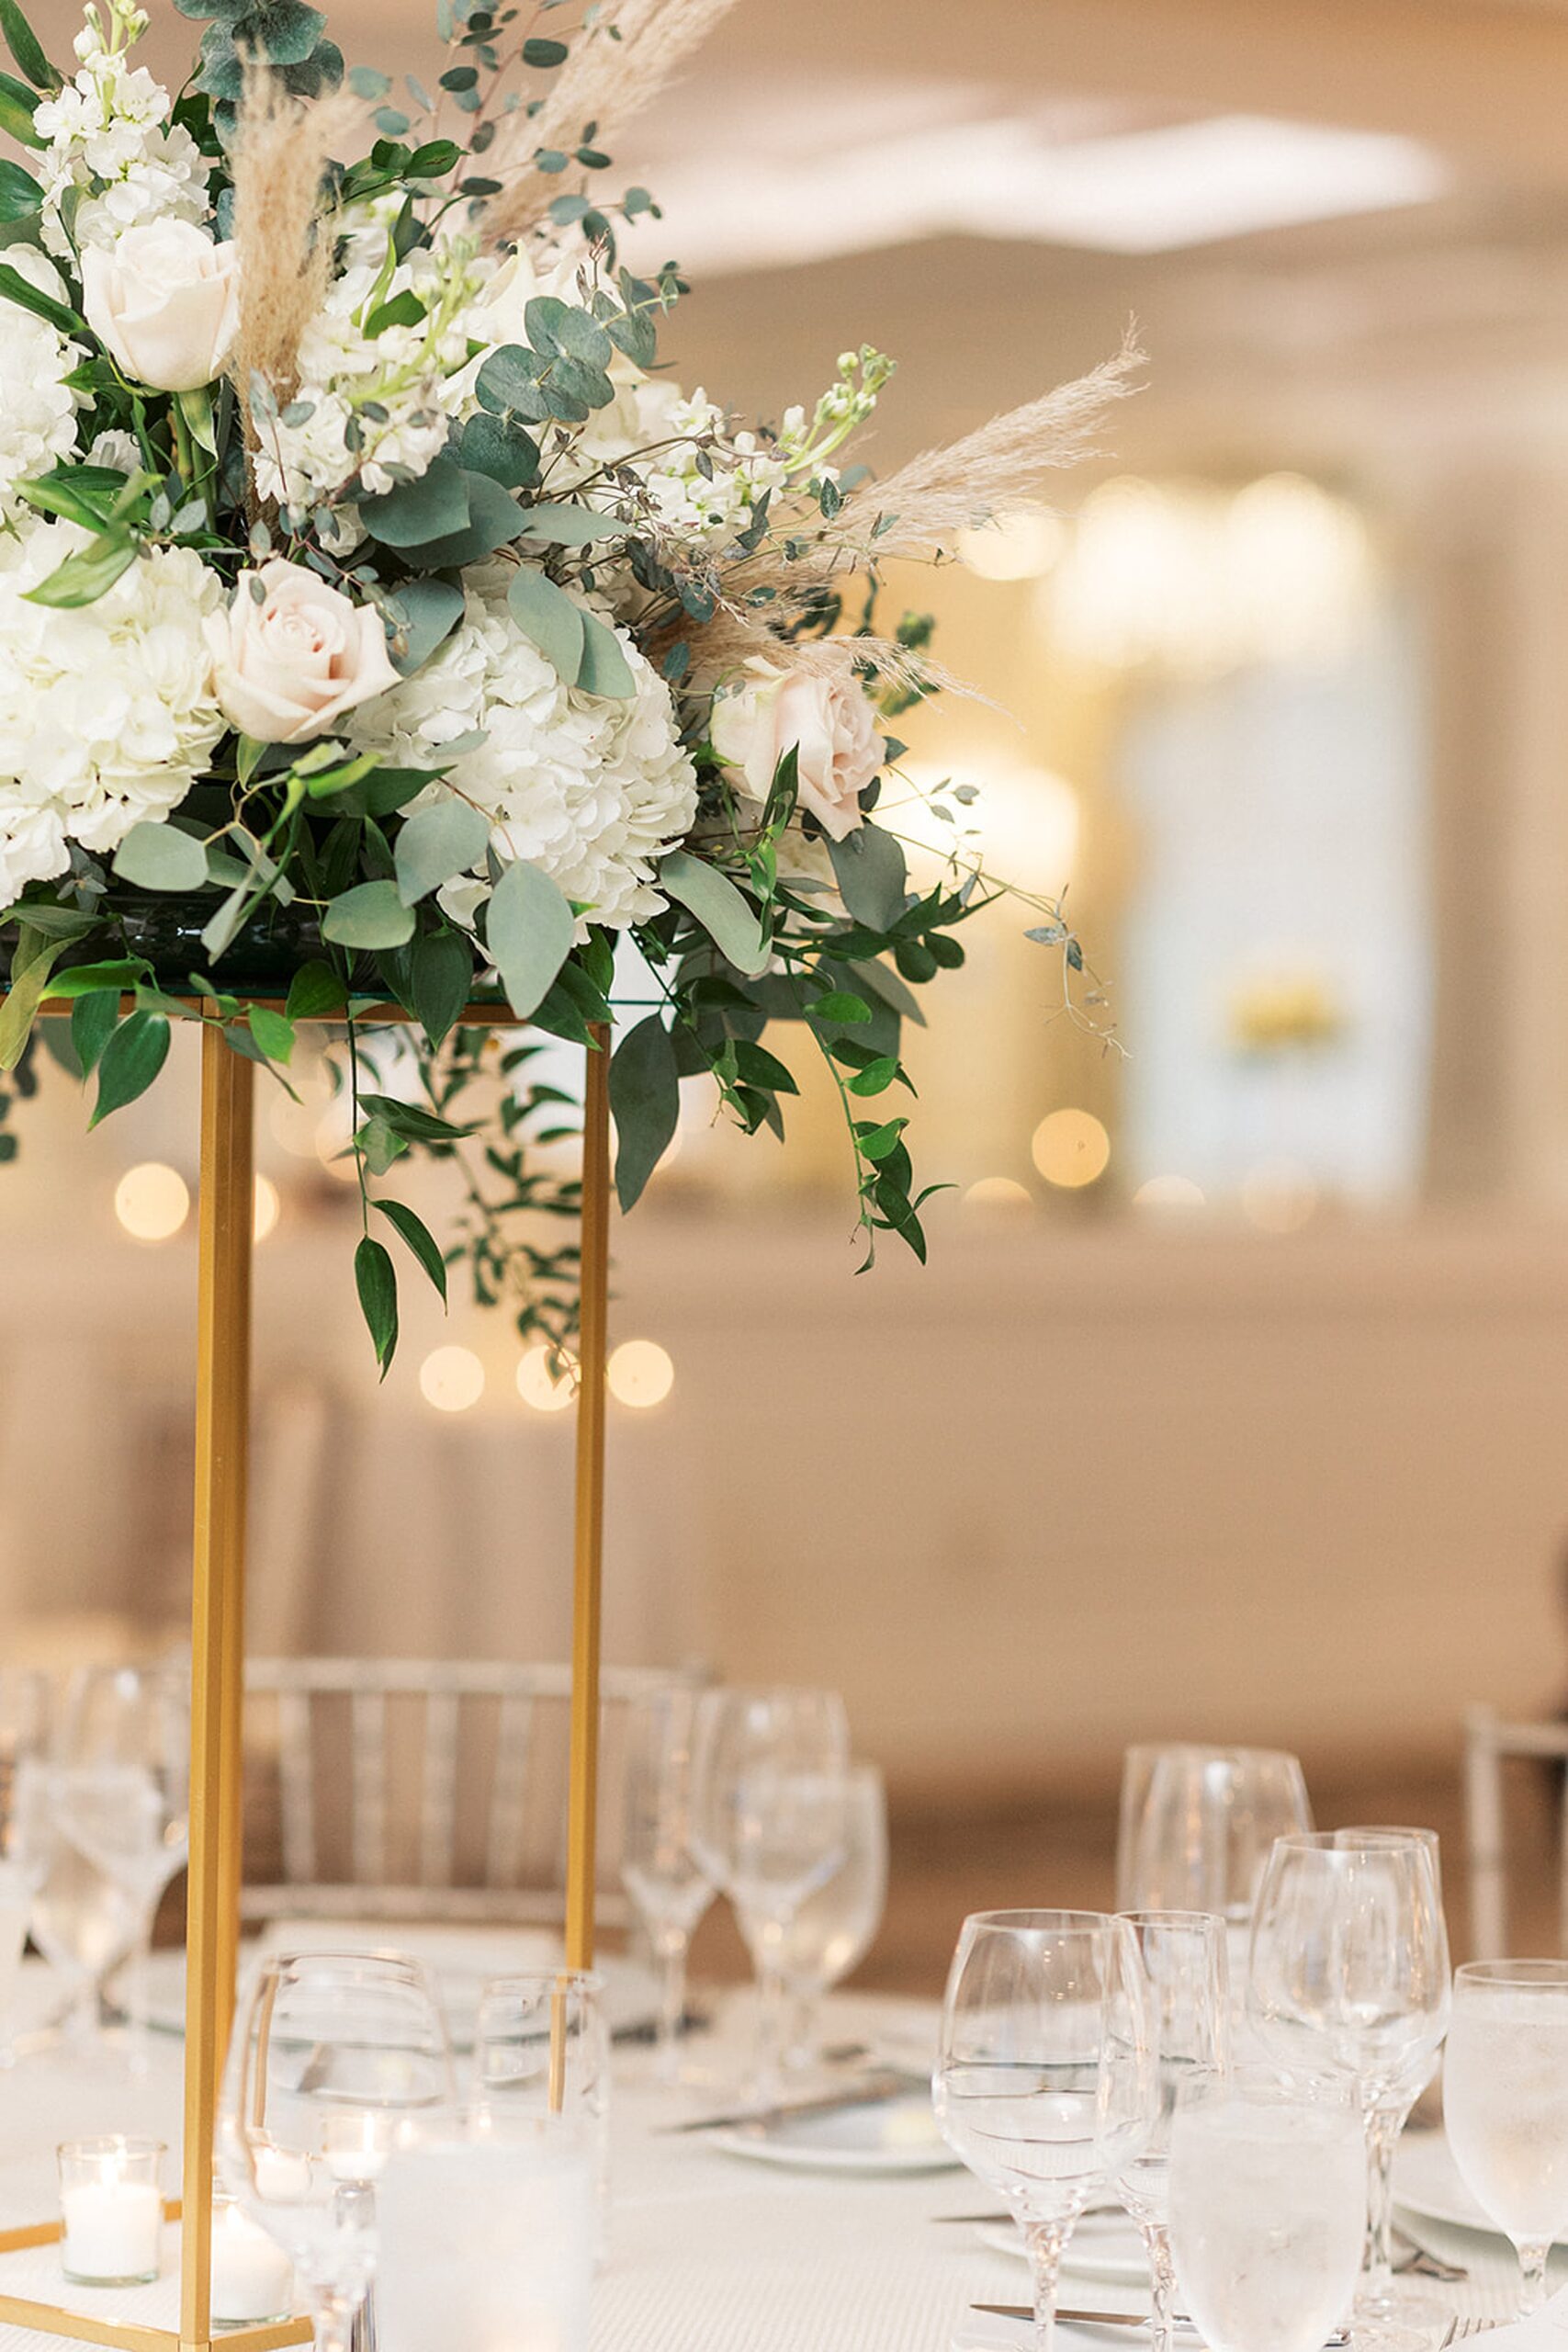 Details of a table setting with white floral center piece